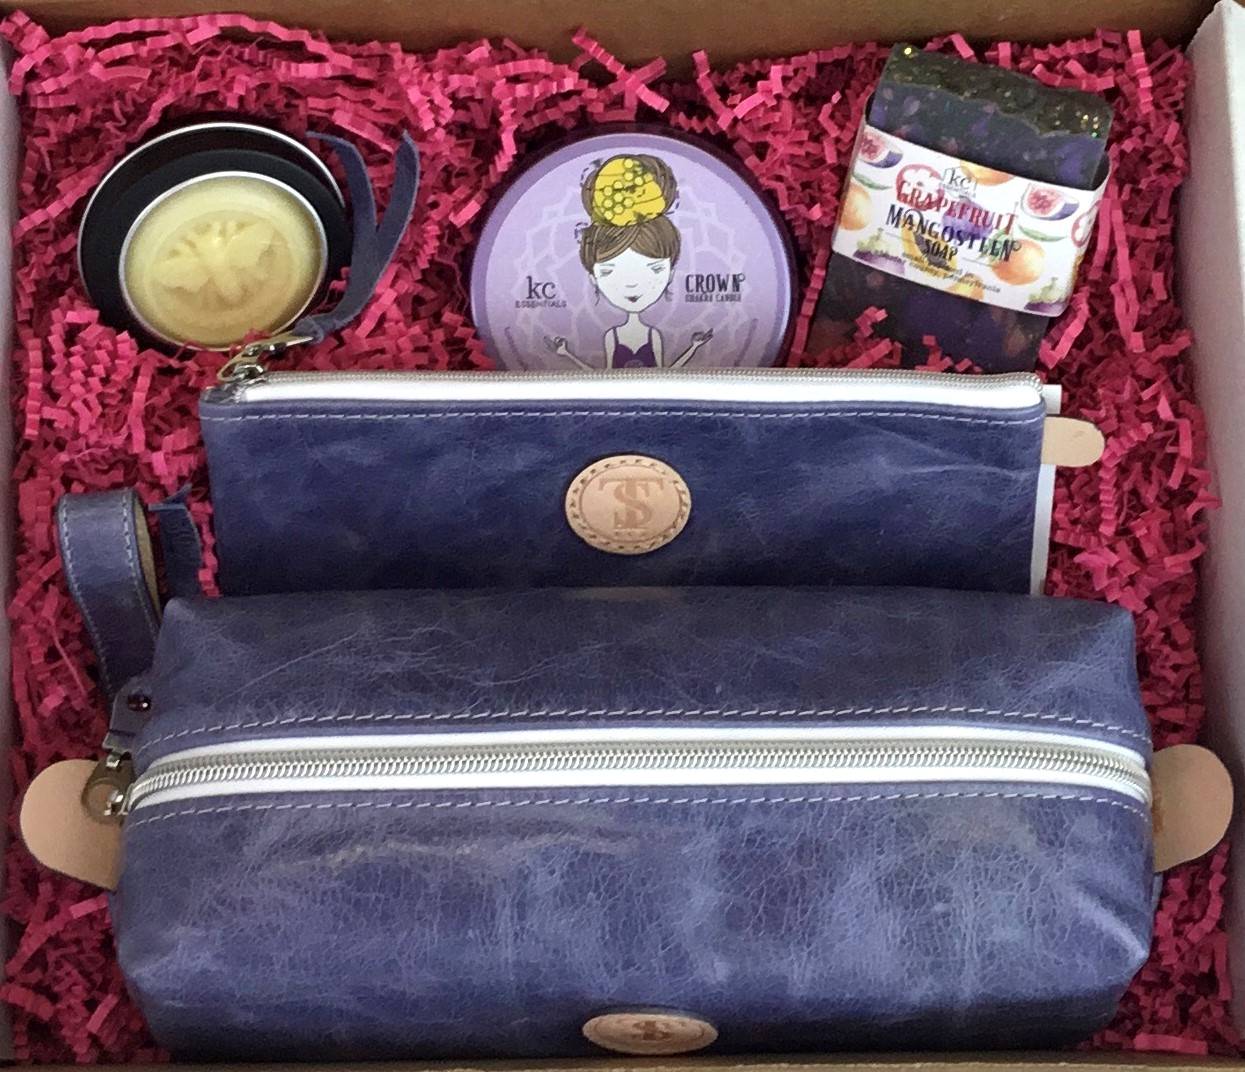 Town &amp; Shore Handcrafted Serenity Gift set featuring T5 Leather bath kit and brush bag shown in denim blue calfskin leather. KC Essentials artisan made vegan bar soap, scented soy chakra candle in a purple metal tin with a lady in a seated yoga pose on lid, and natural solid lotion bar in metal tin. Arranged in gift box with sustainable eco-friendly bright pink crinkle paper.